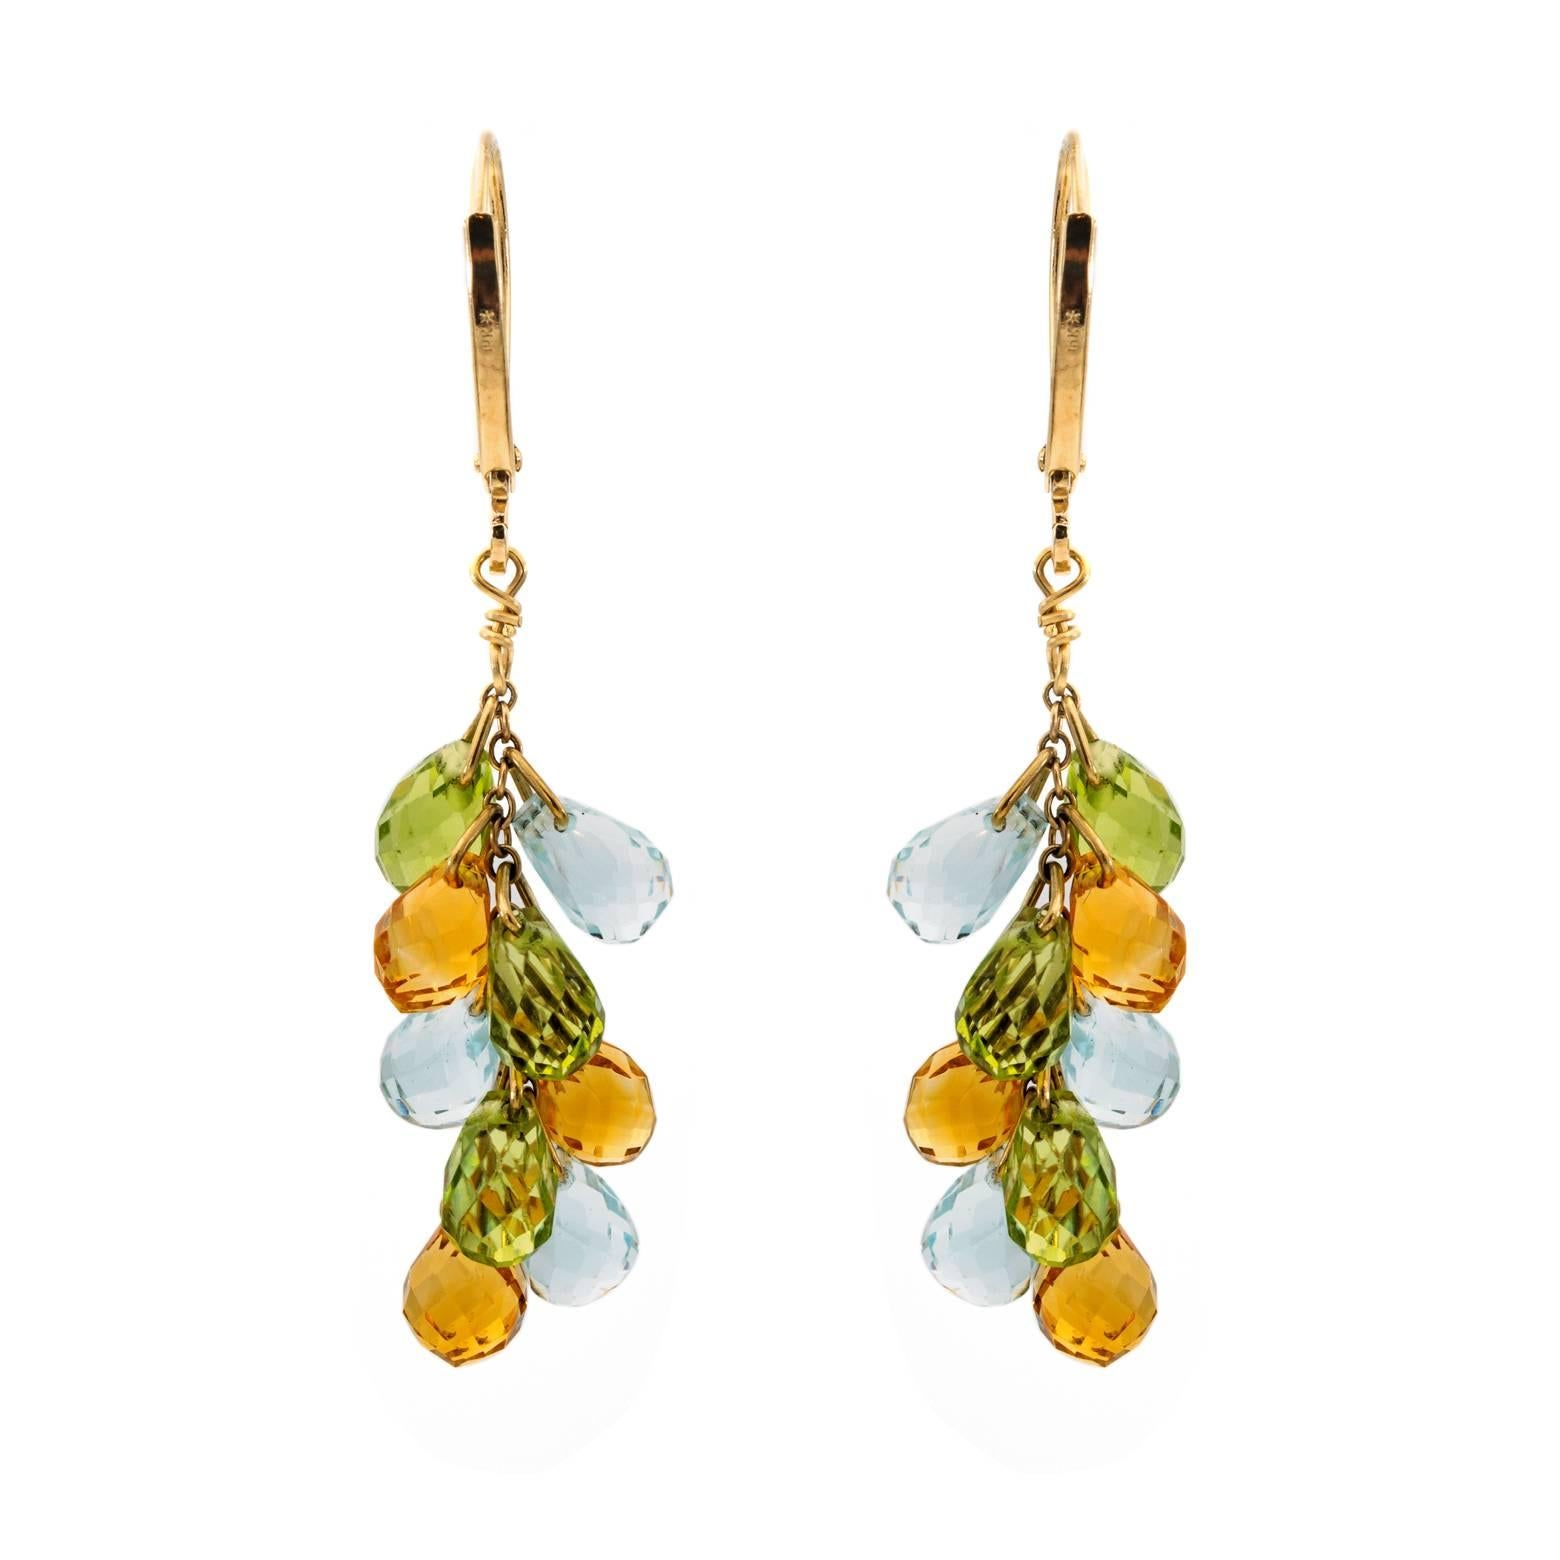 These delicate teardrop earrings are 14k gold and made with beautifully faceted teardrops in aquamarine, peridot & citrine. The earrings are fun and can be worn everyday.